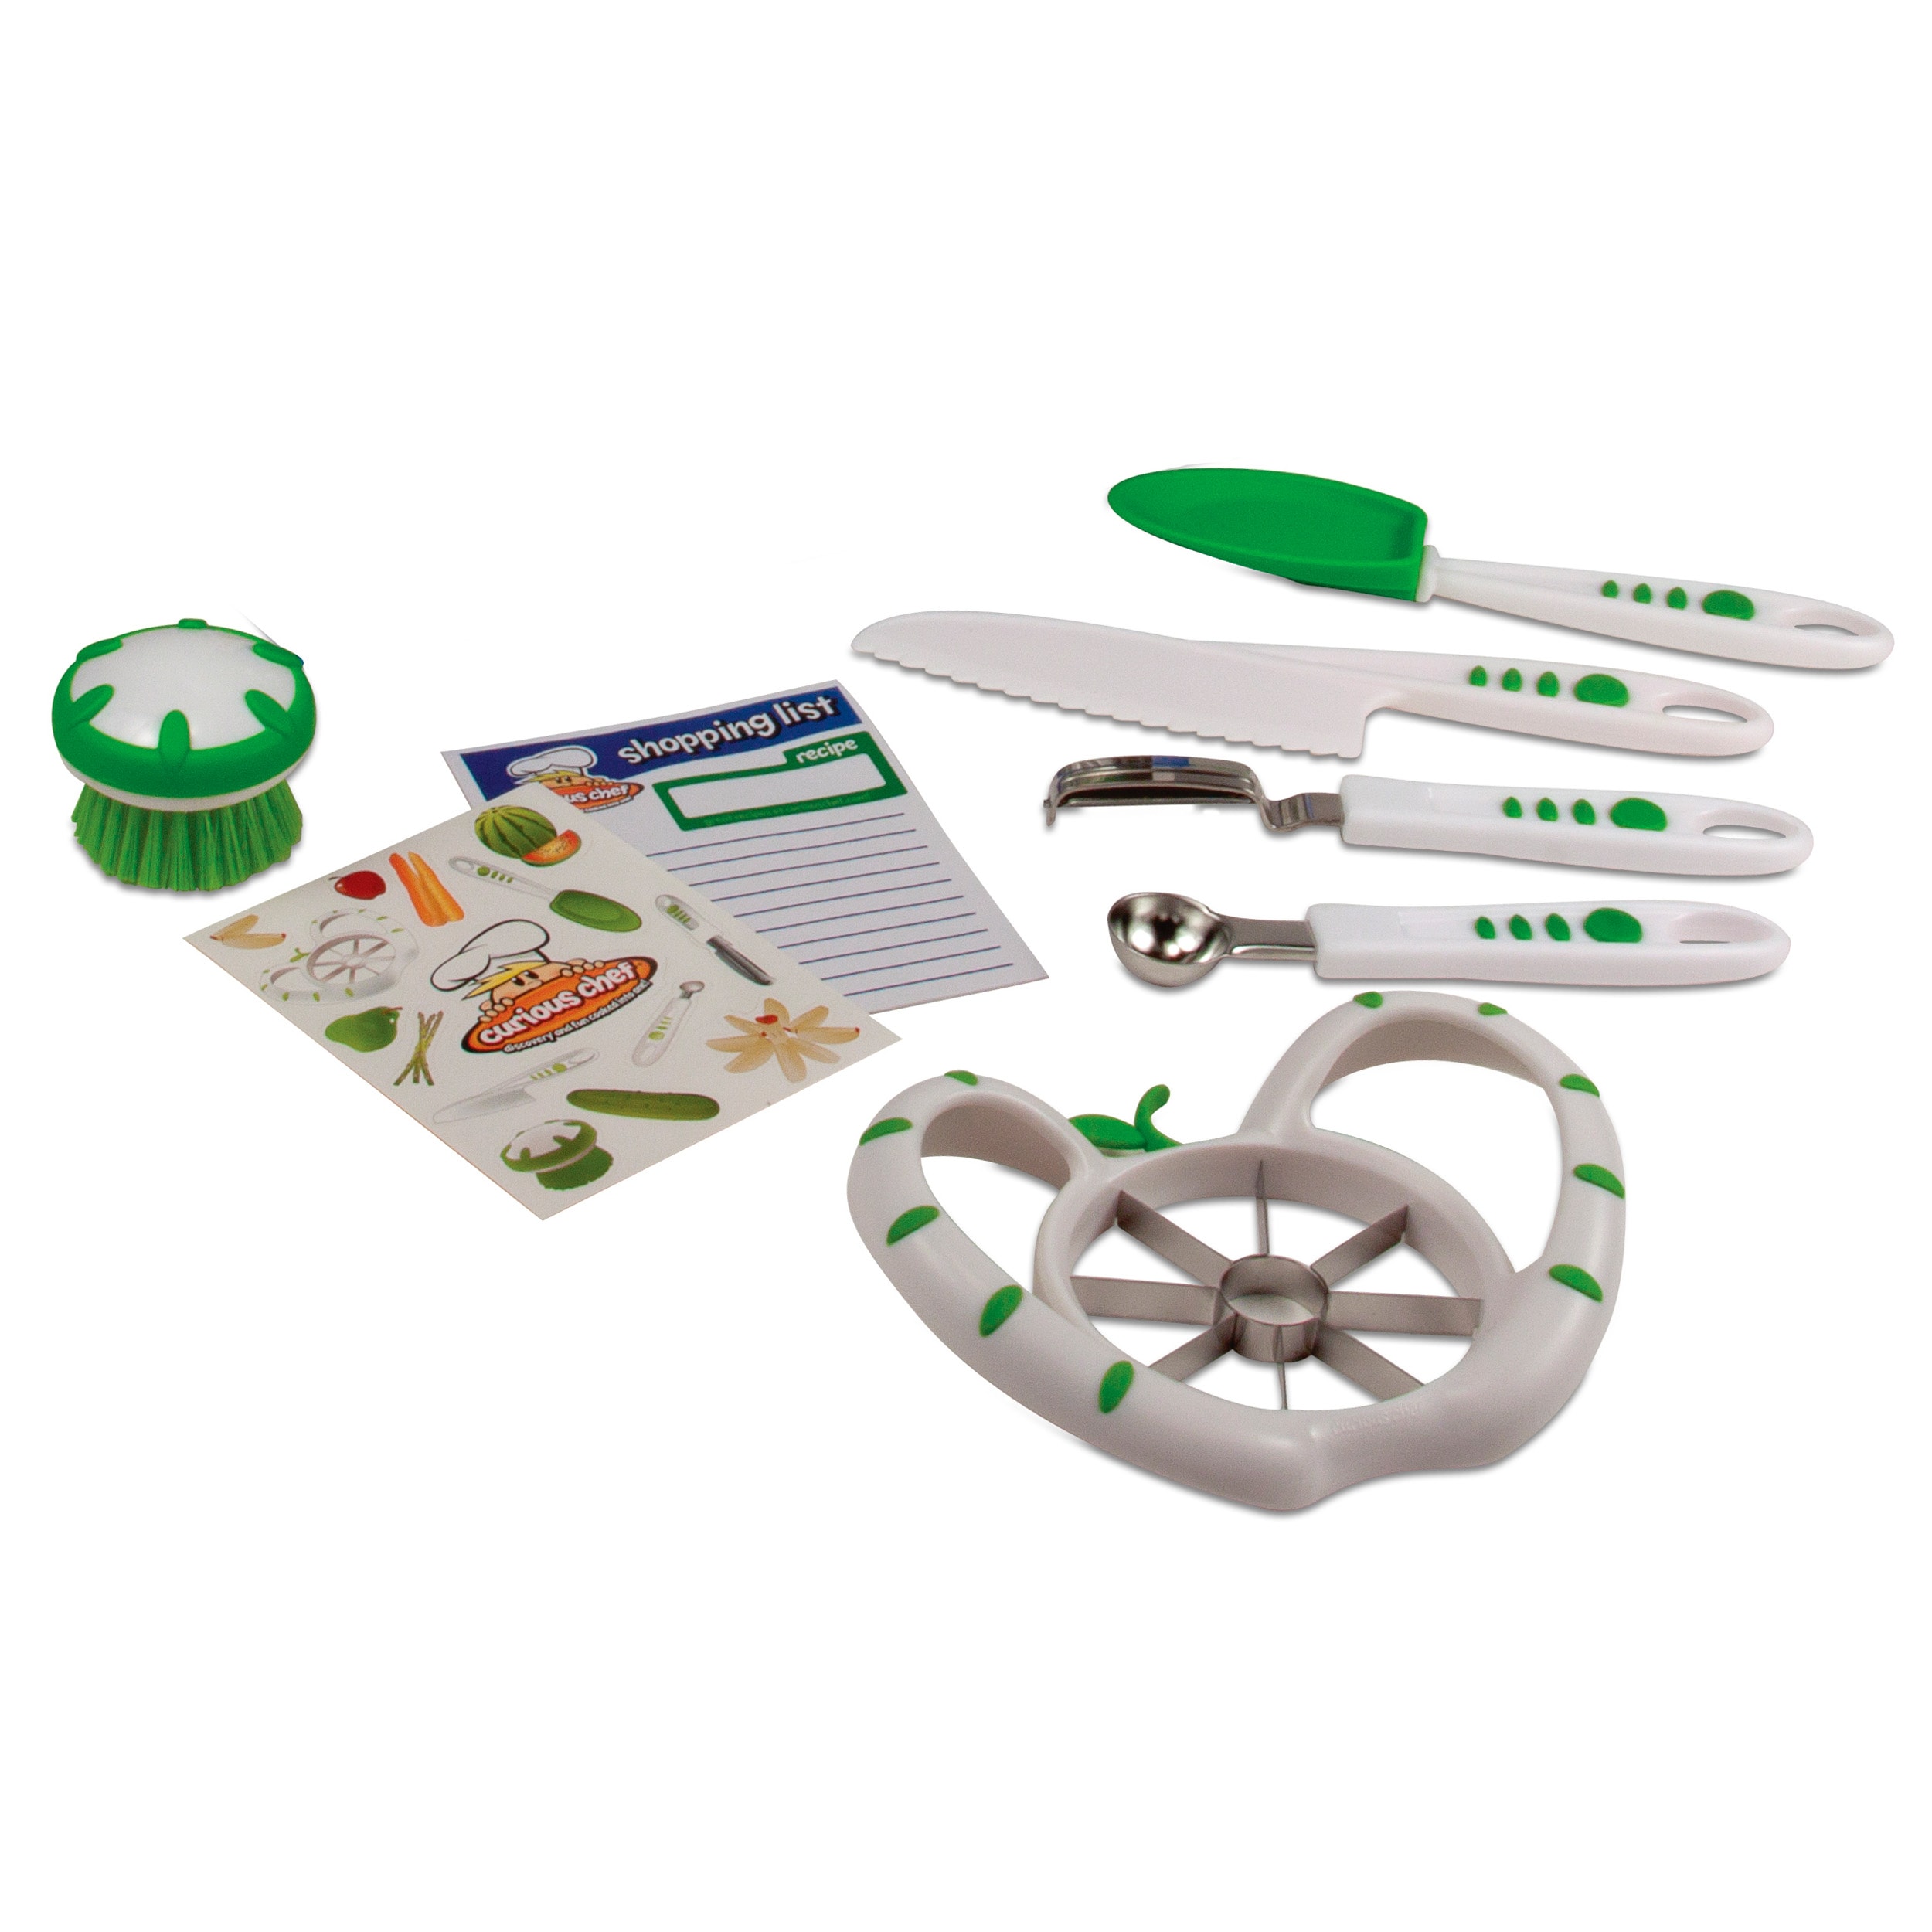 https://ak1.ostkcdn.com/images/products/8137098/8137098/Curious-Chef-Fruit-and-Veggie-Prep-Kit-L15481034.jpg